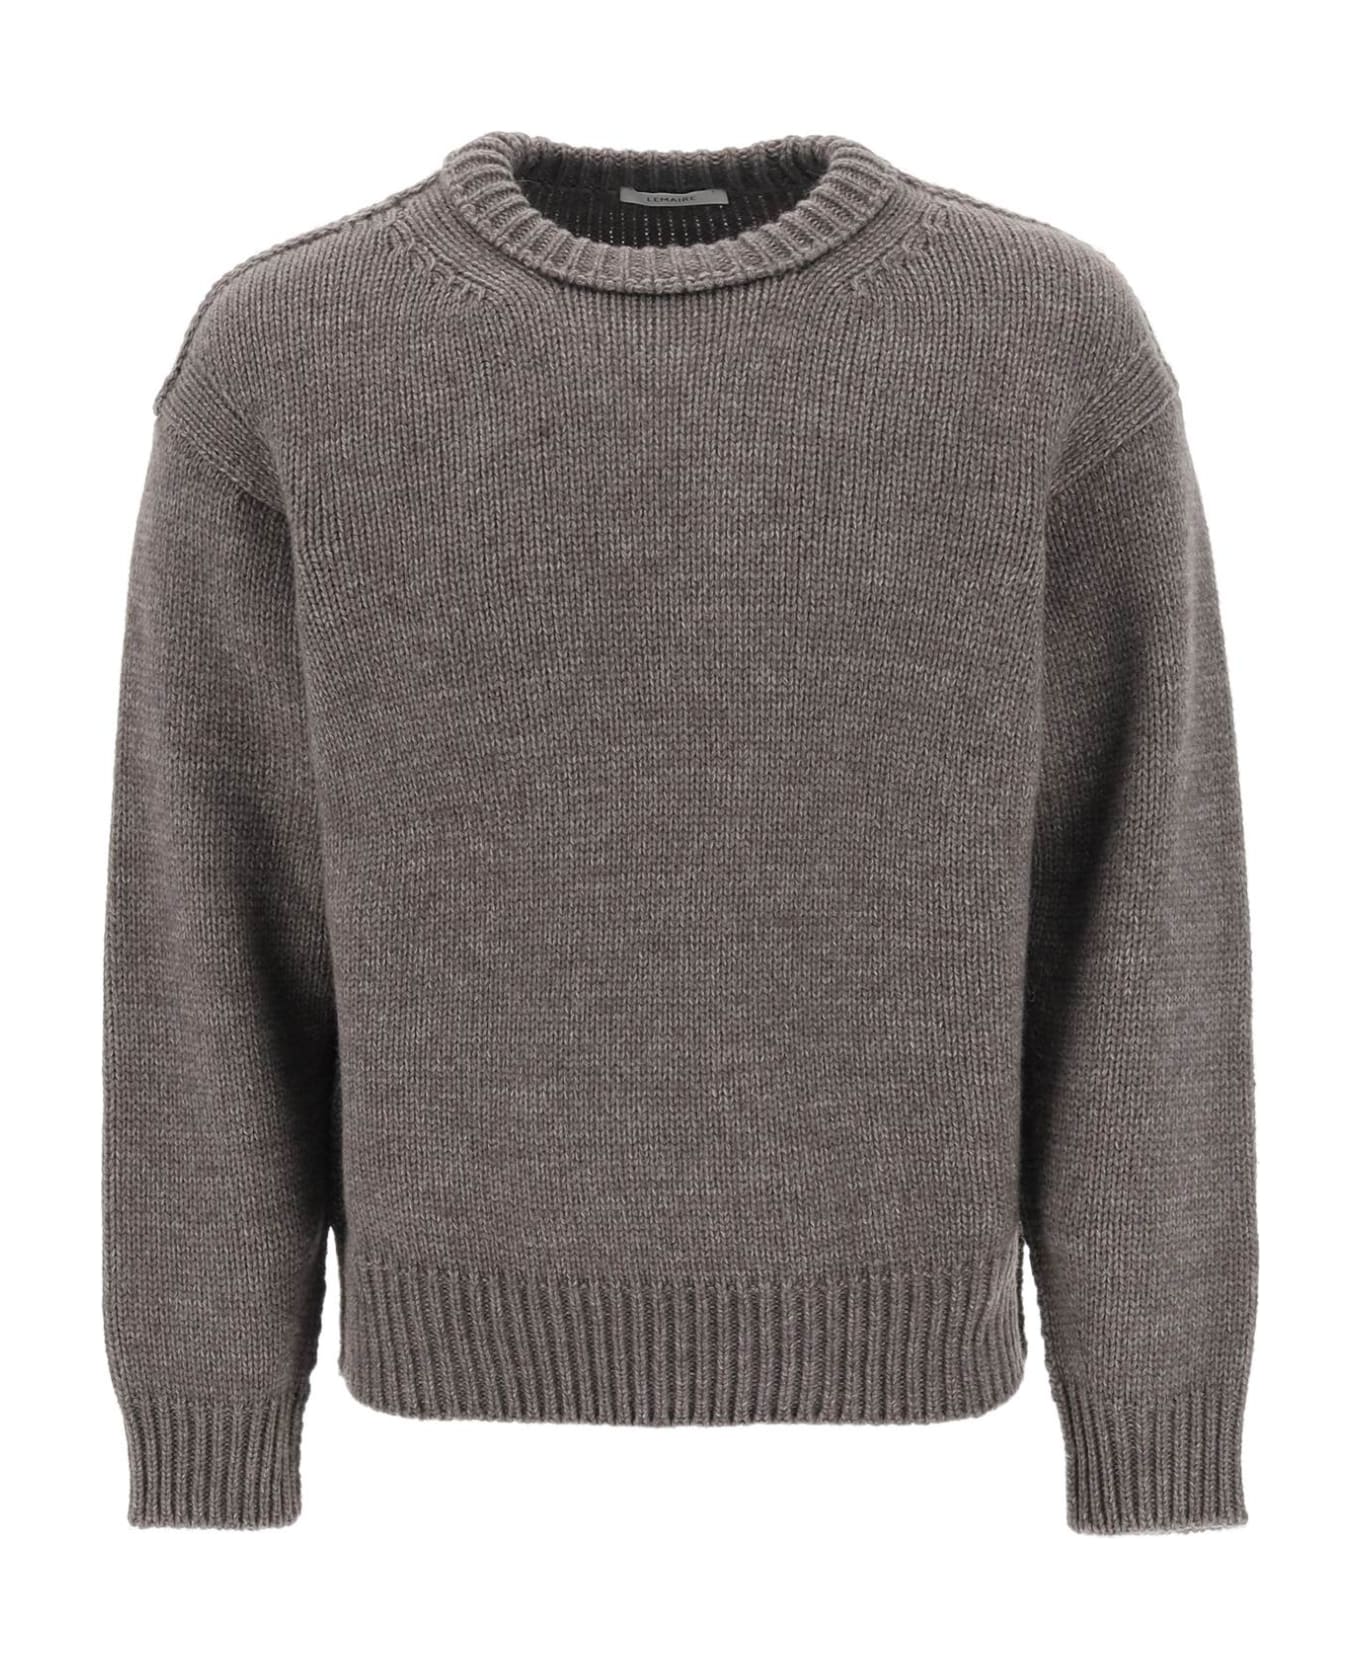 Lemaire Wool And Alpaca Blend Sweater - Grigio